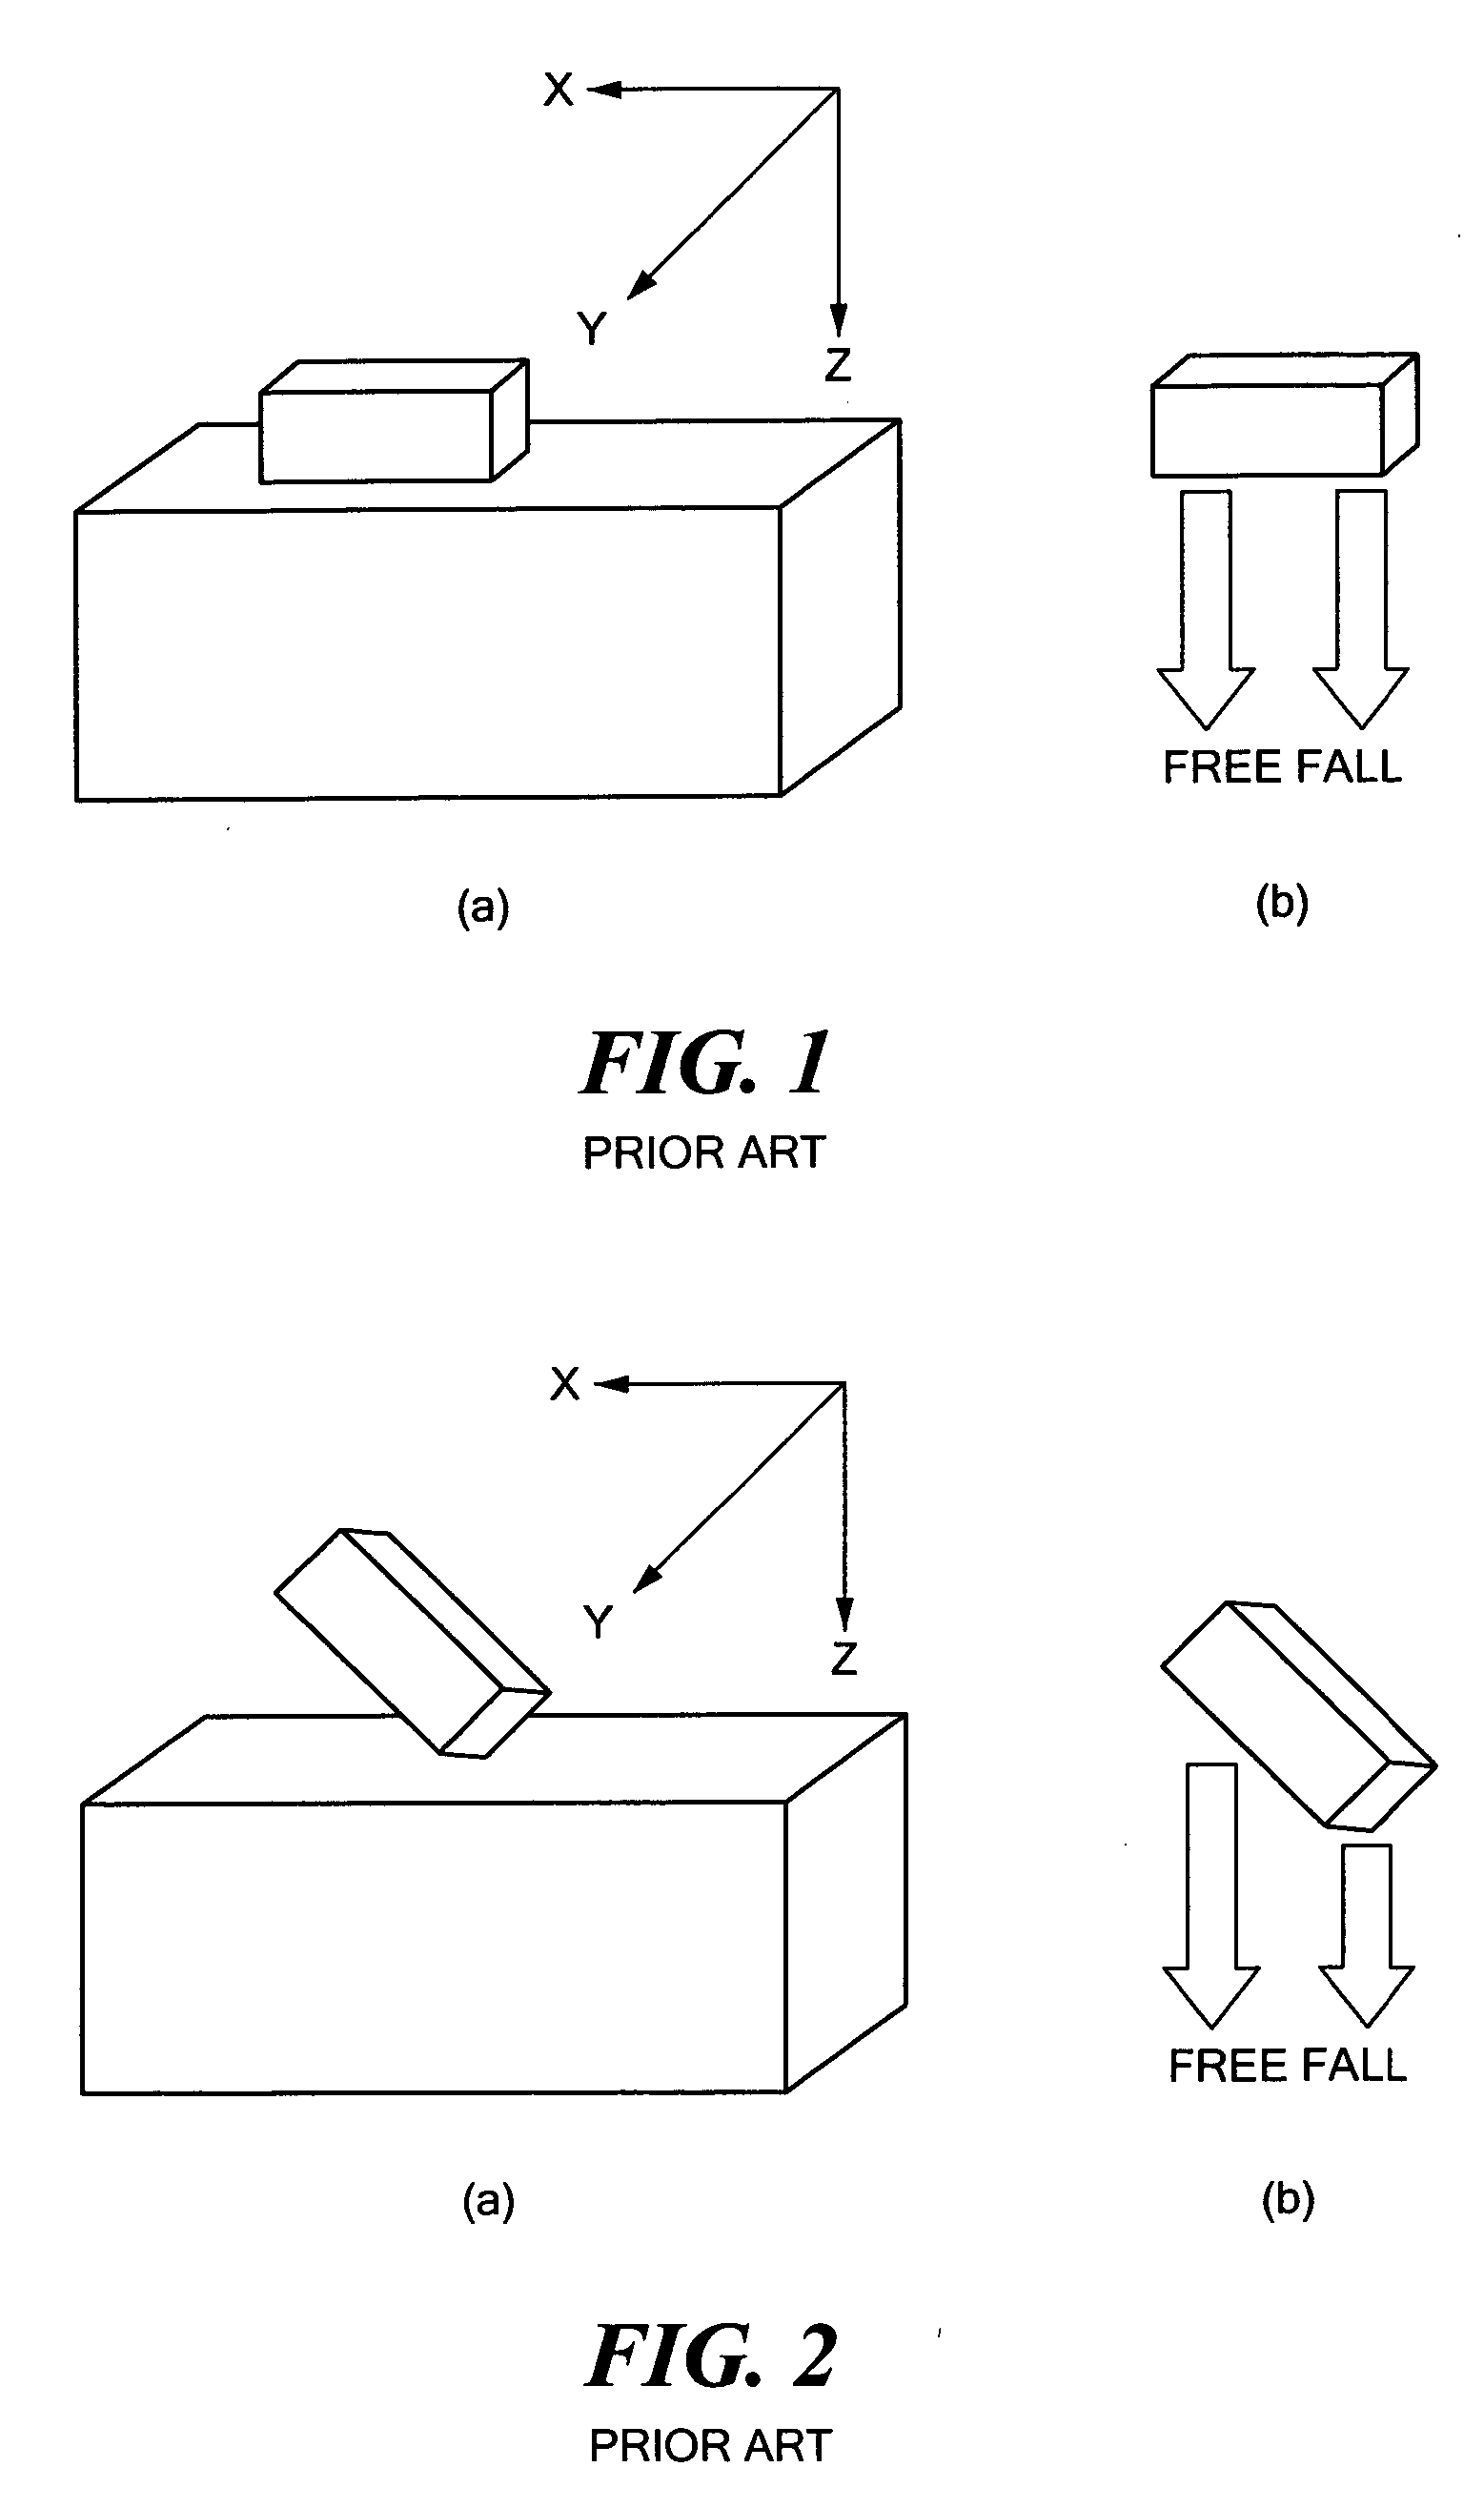 Accelerometer-based differential free fall detection system, apparatus, and method and disk drive protection mechanism employing same